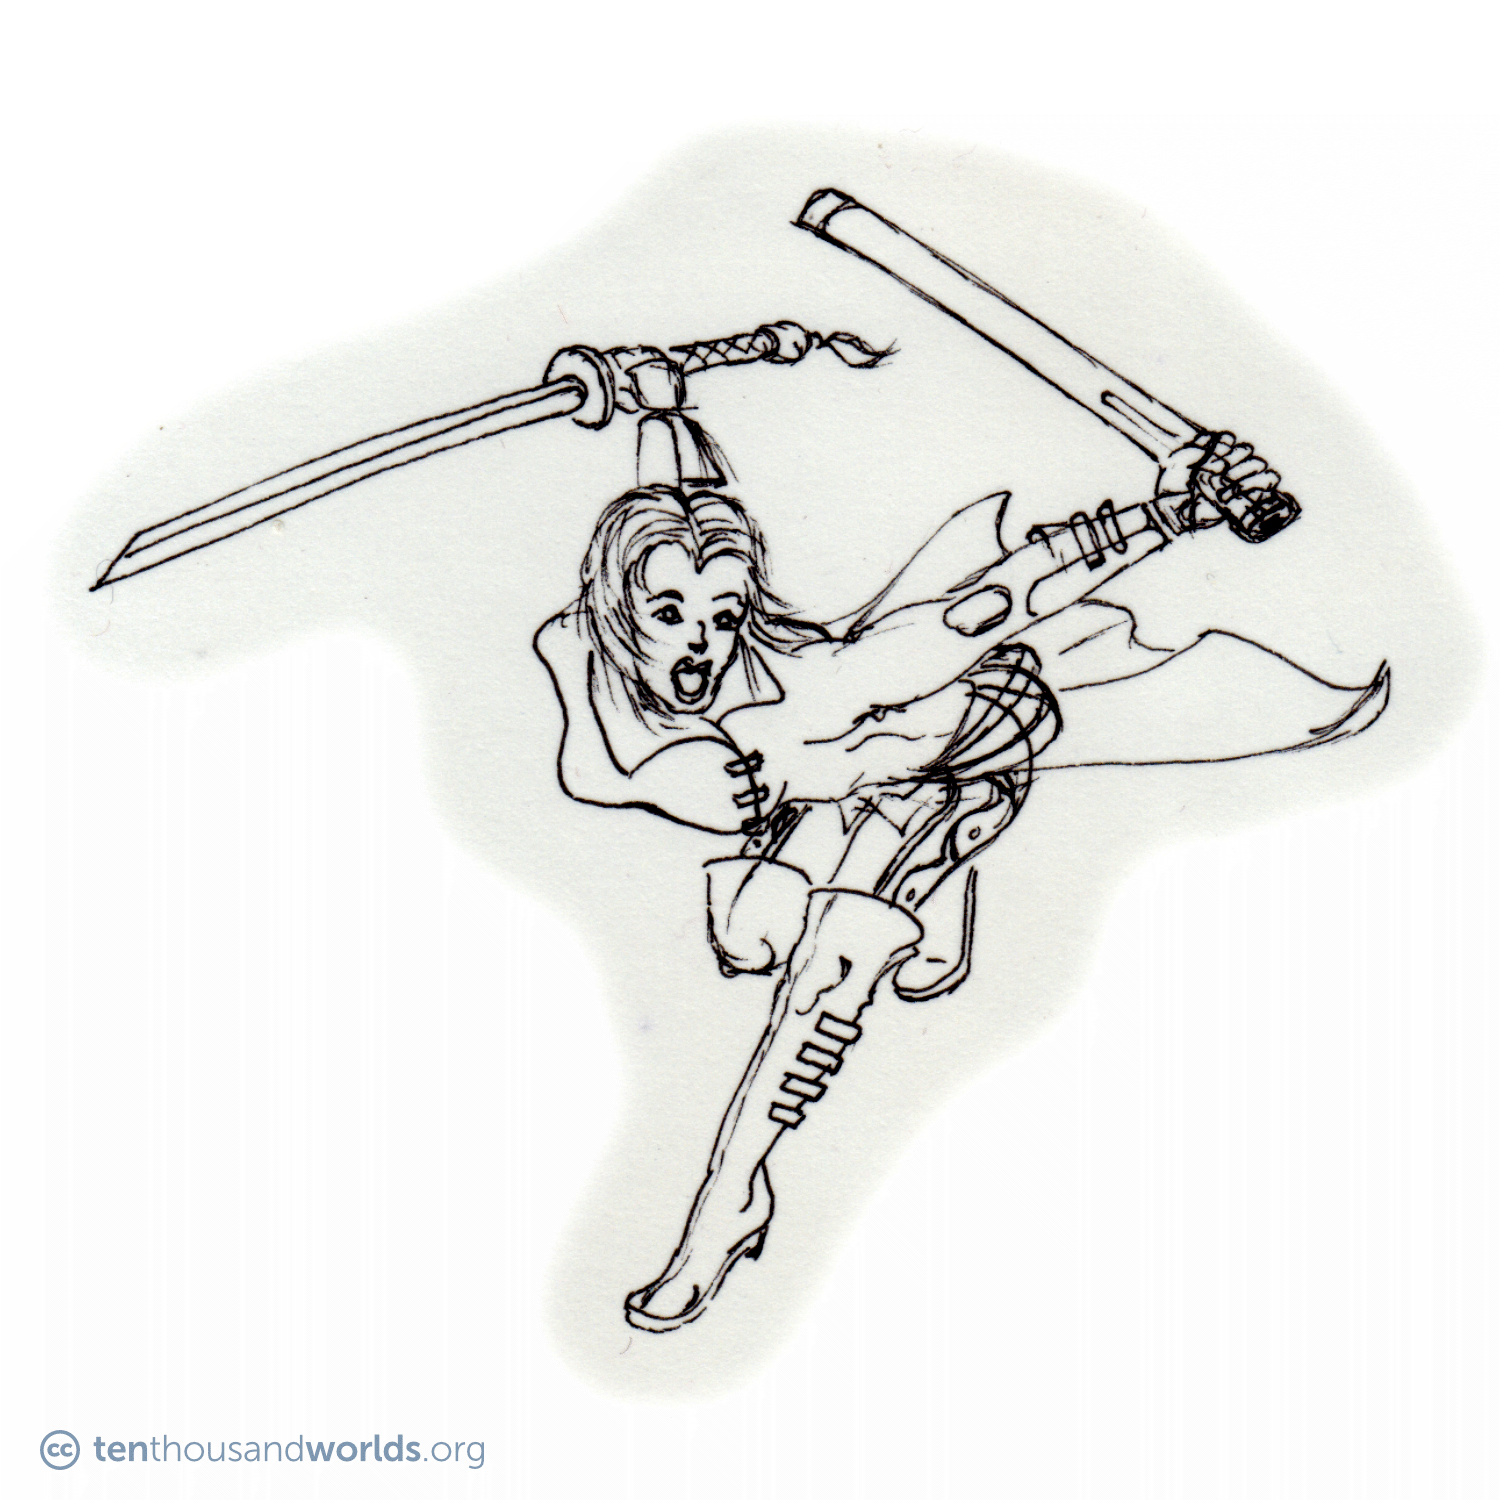 An ink outline of a woman wielding a katana-like sword in one hand while using its sheath to parry with the other. She wears a long leather coat, leather bracers, overlapping belts, and tall boots with multiple buckles. Her short hair waves about wildly.